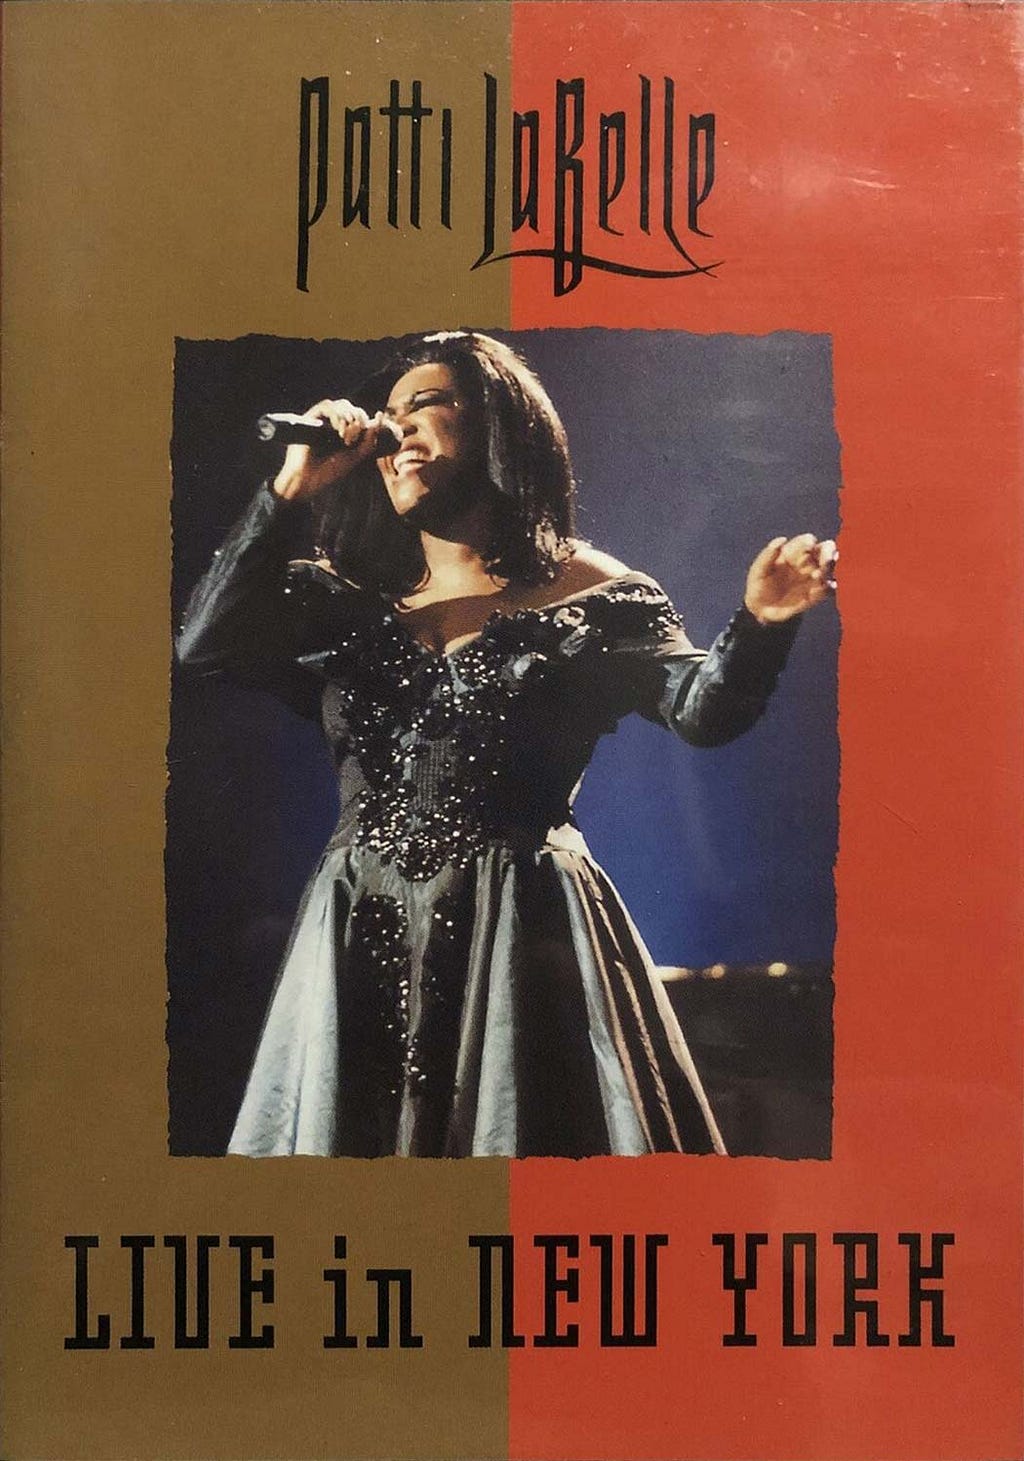 The cover of Patti LaBelle’s ‘Live in New York’ DVD shows LaBelle singing under stage lights in a pleated mini-dress that features a jeweled bodice and plunging neckline.